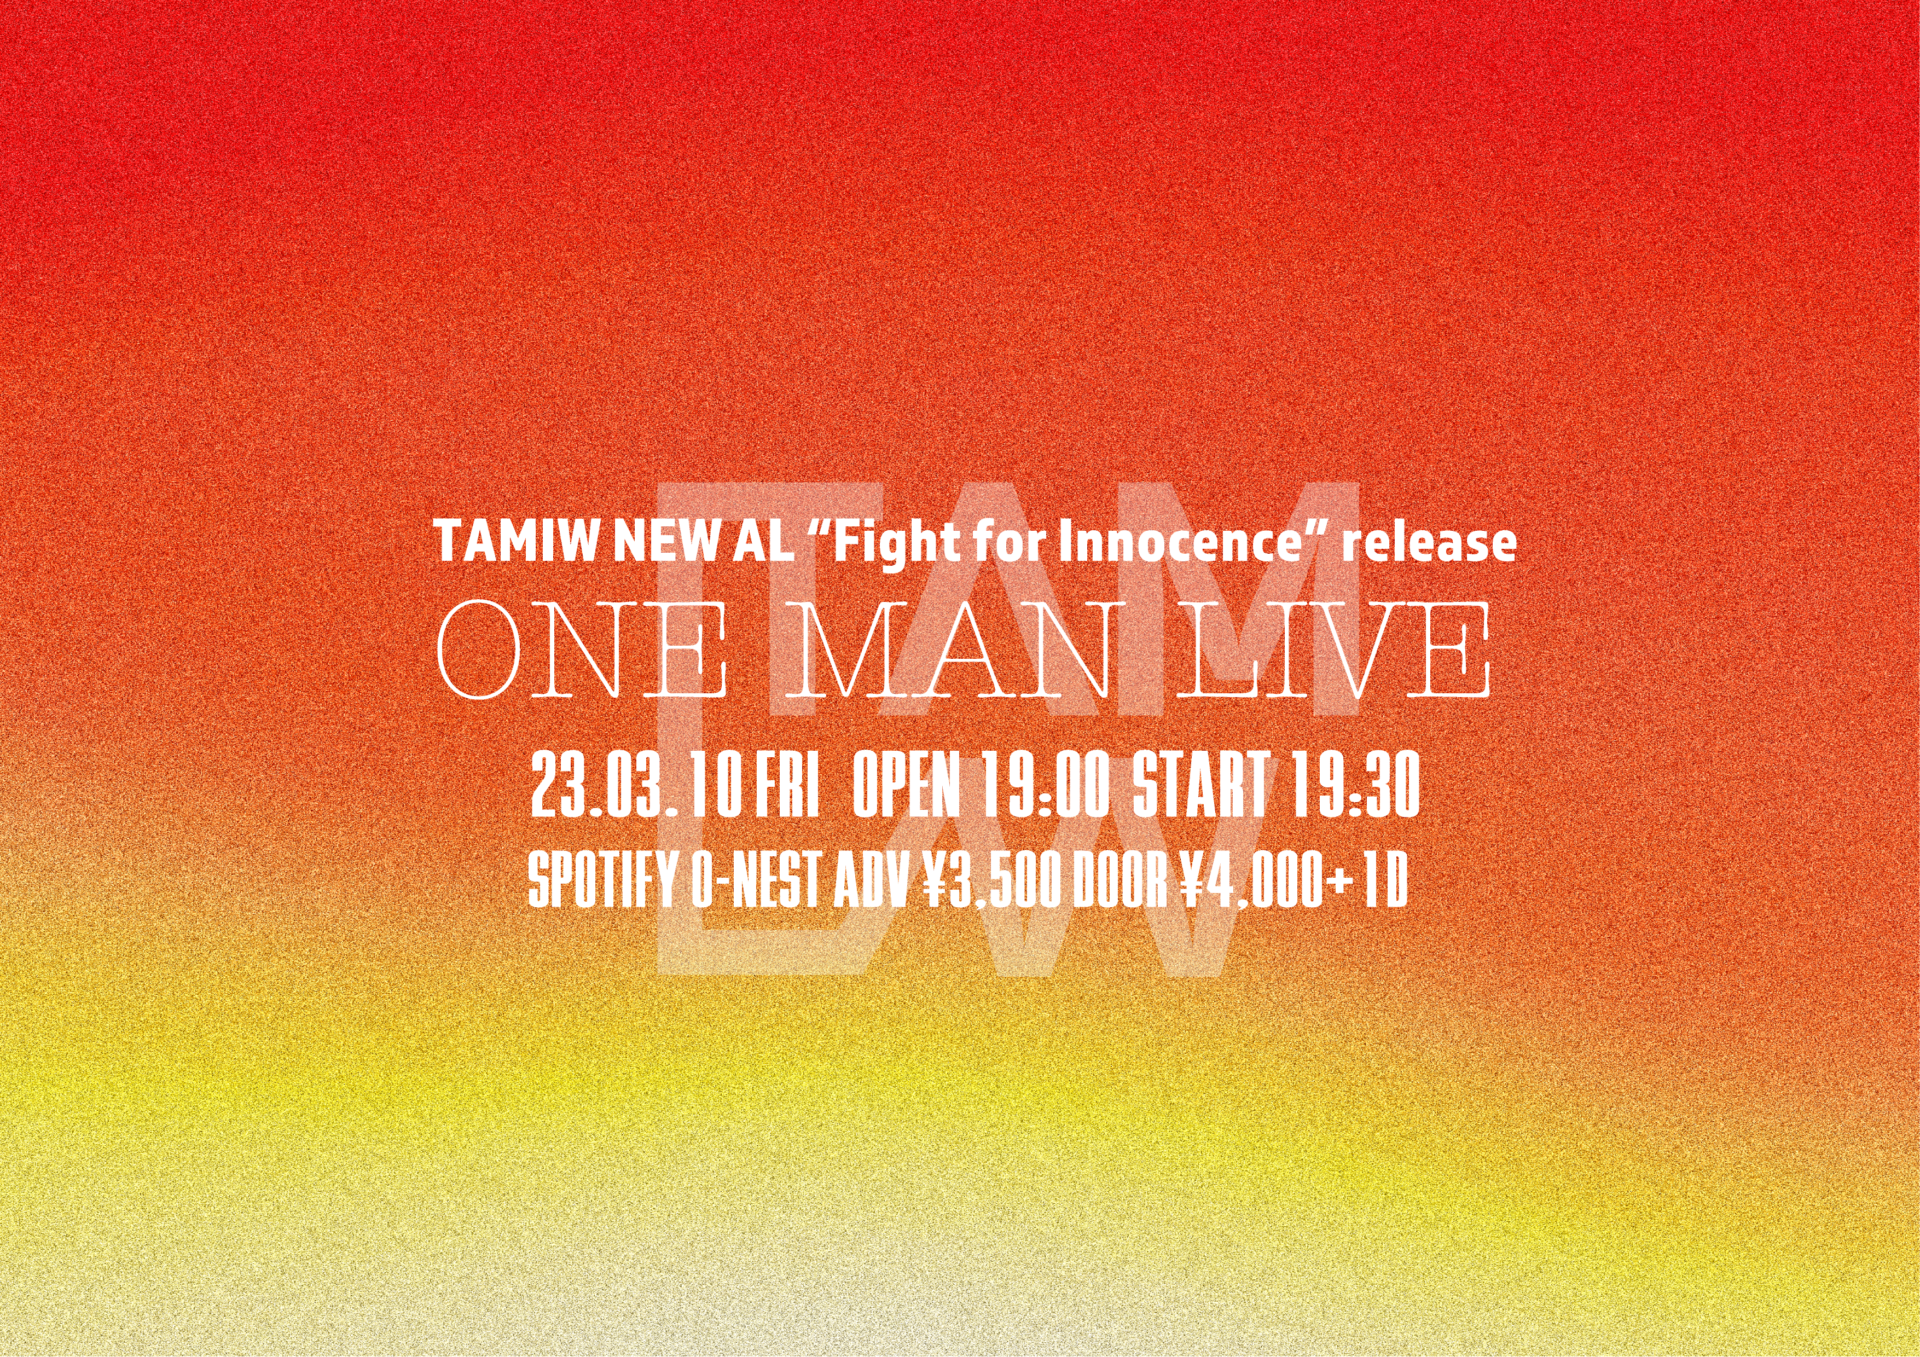 TAMIW NEW AL “Fight for Innocence”</br>release ONE MAN LIVE